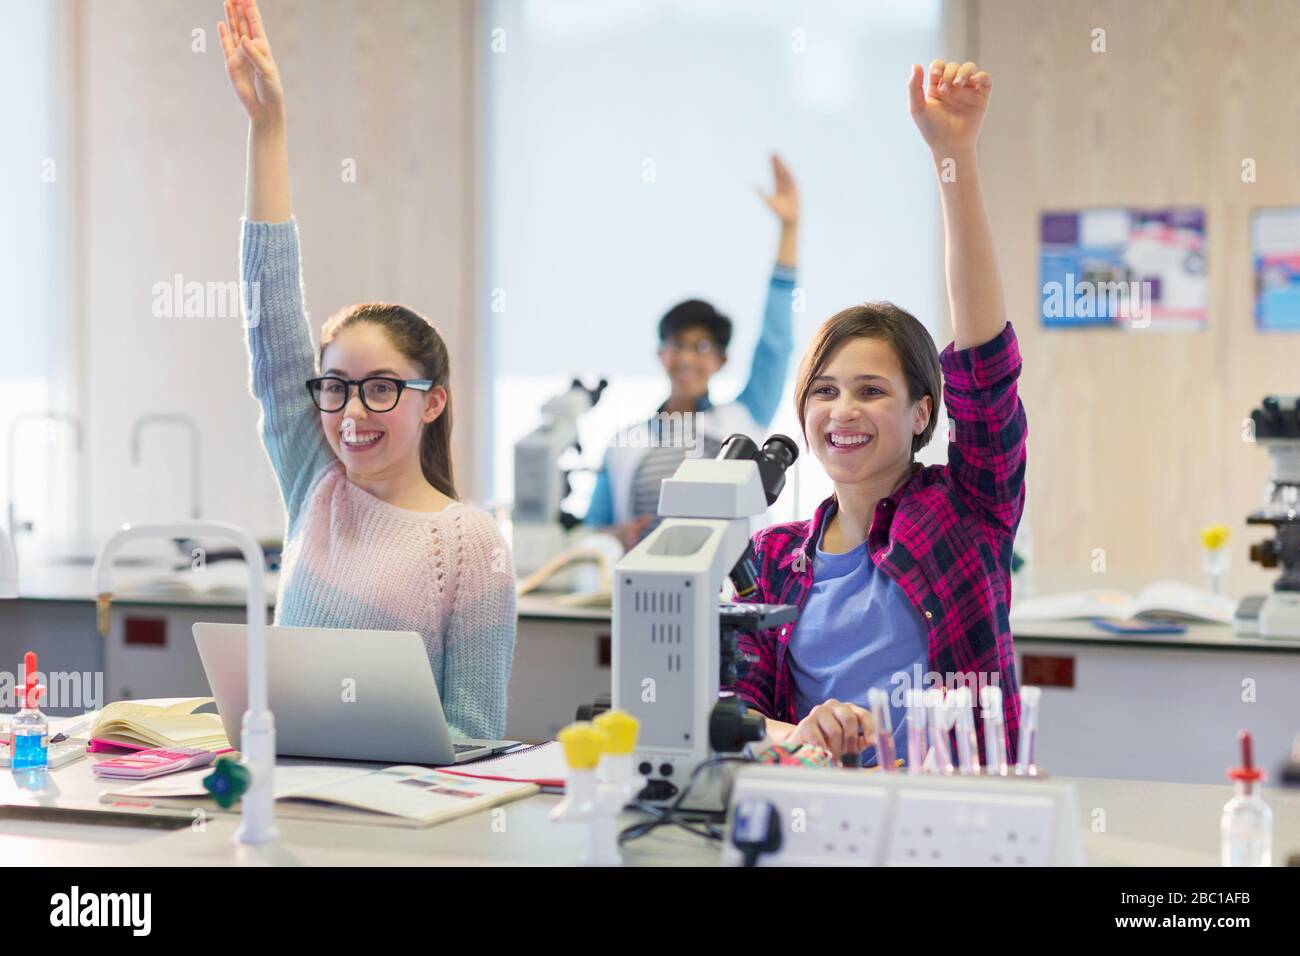 Eager, smiling students raising hands in science laboratory classroom Stock Photo